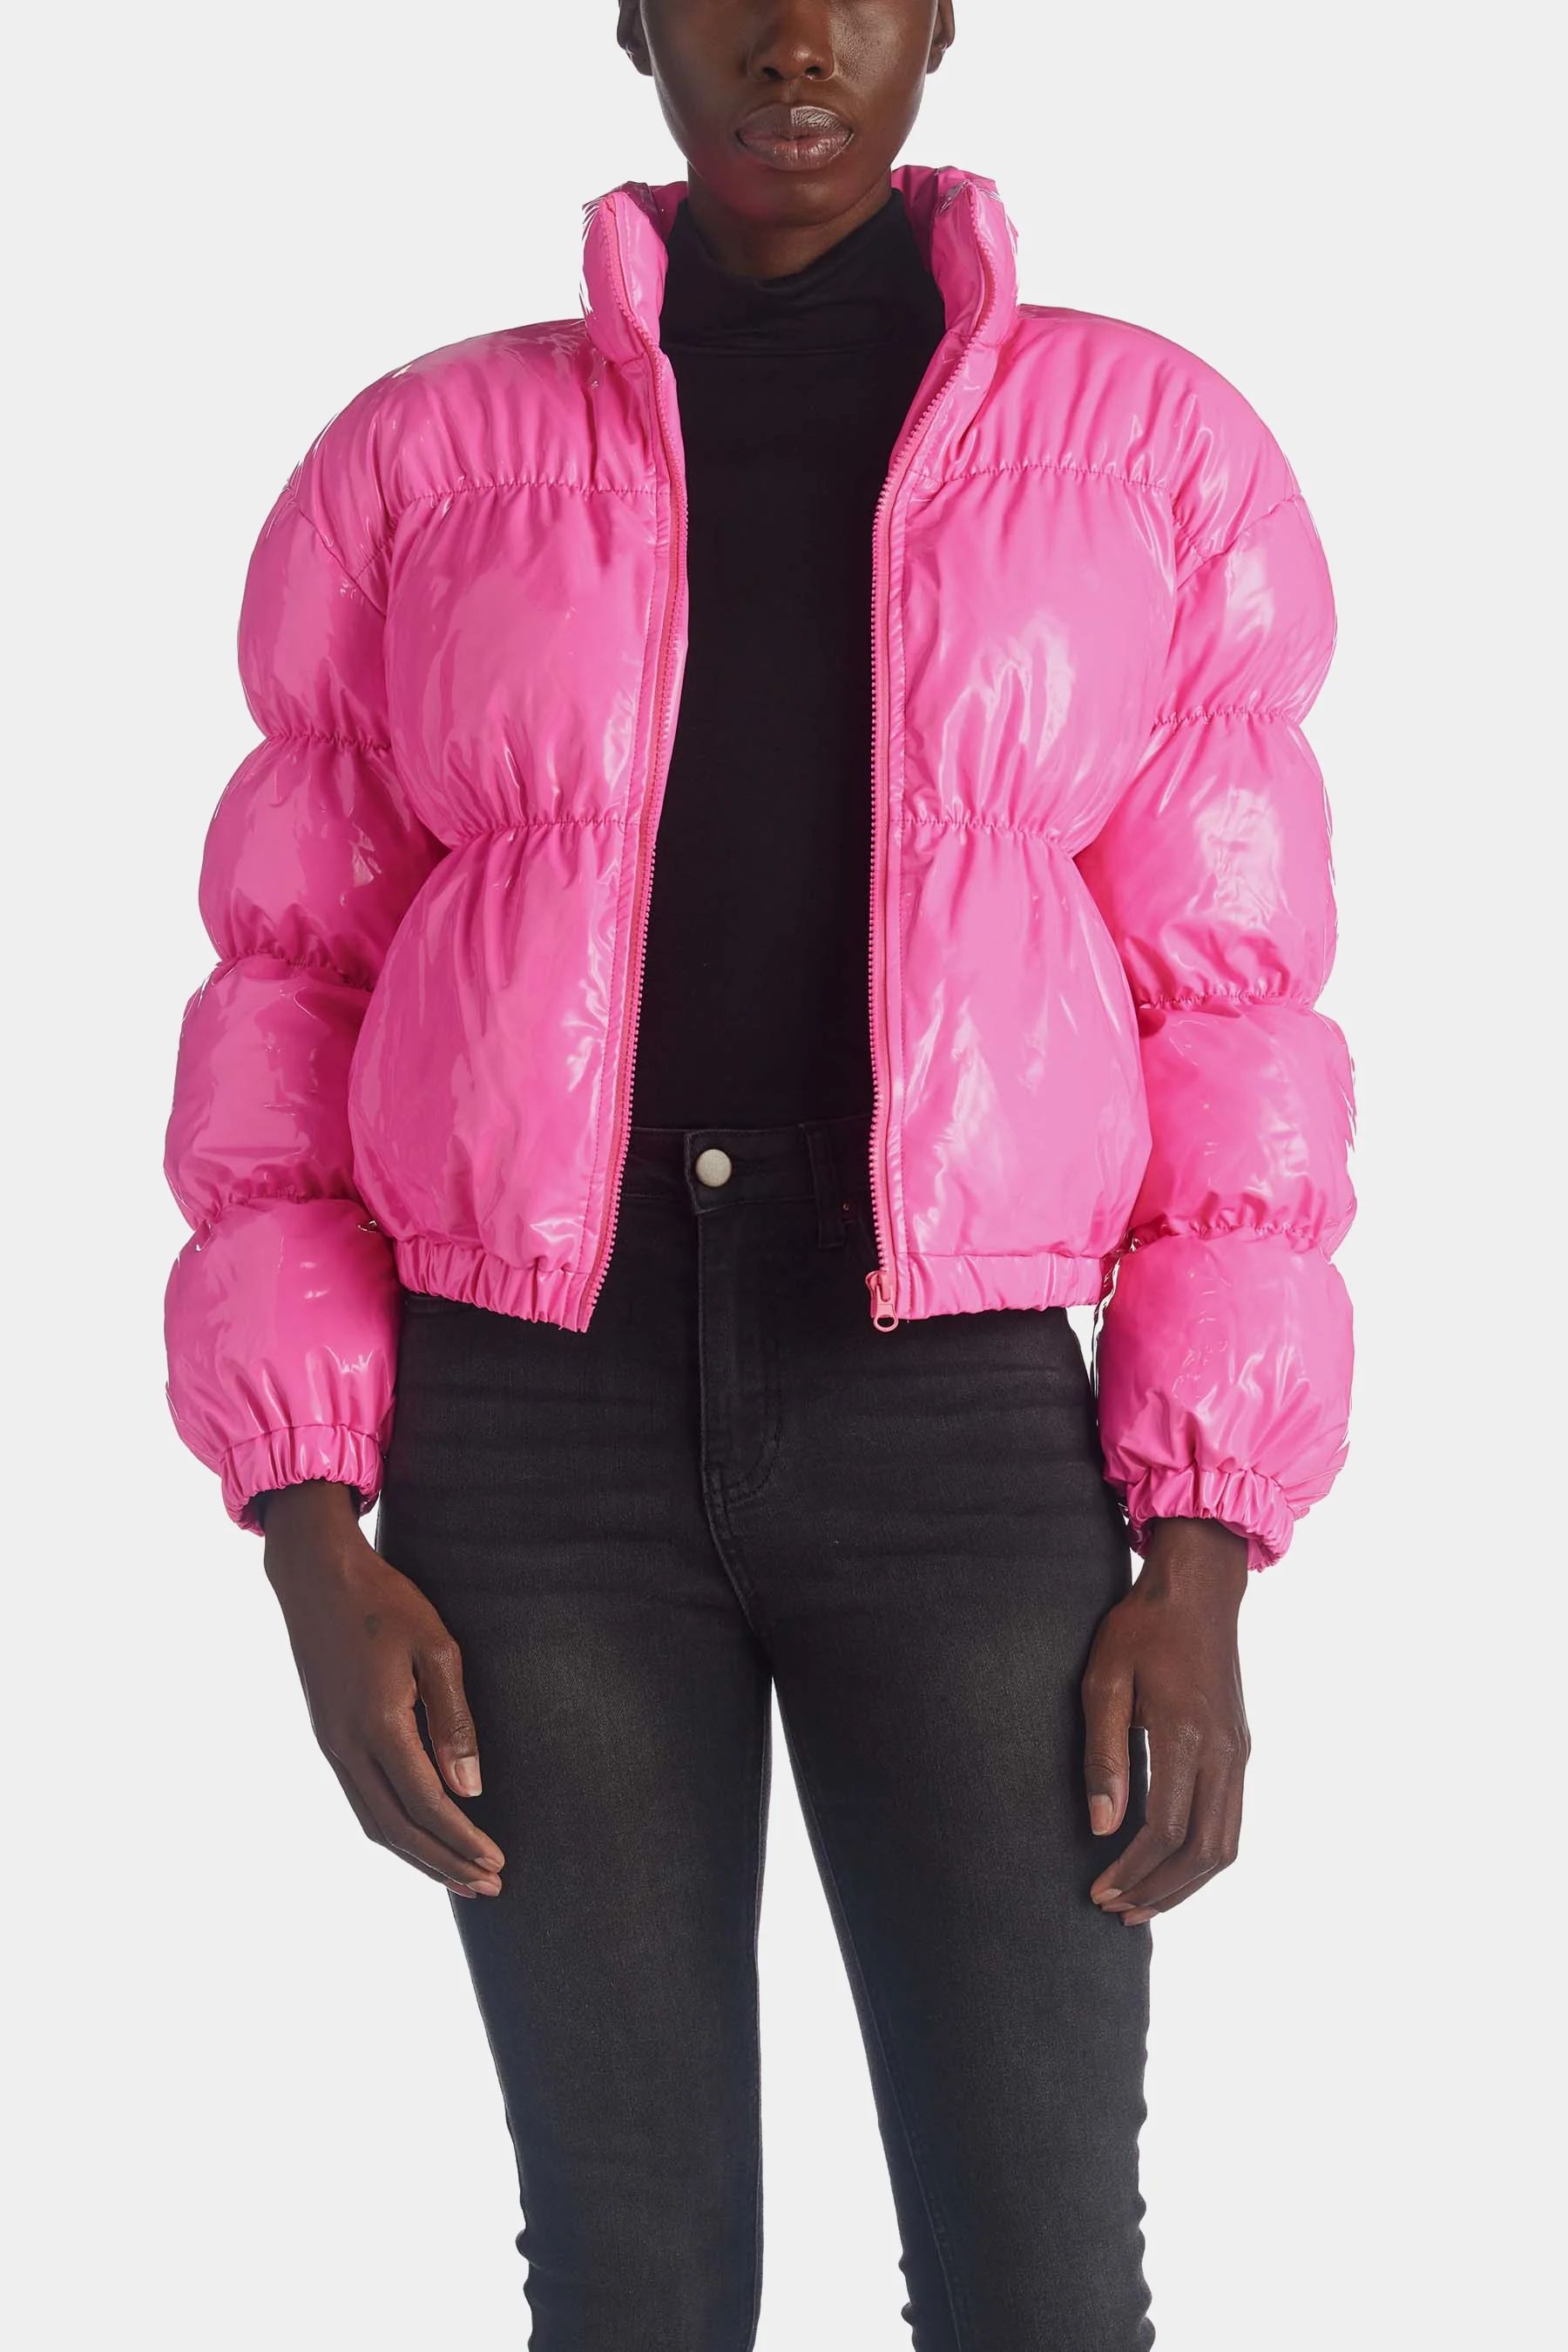 Steve Madden Women's Eden Jacket in Pink Glo Small Lord & Taylor | Lord & Taylor